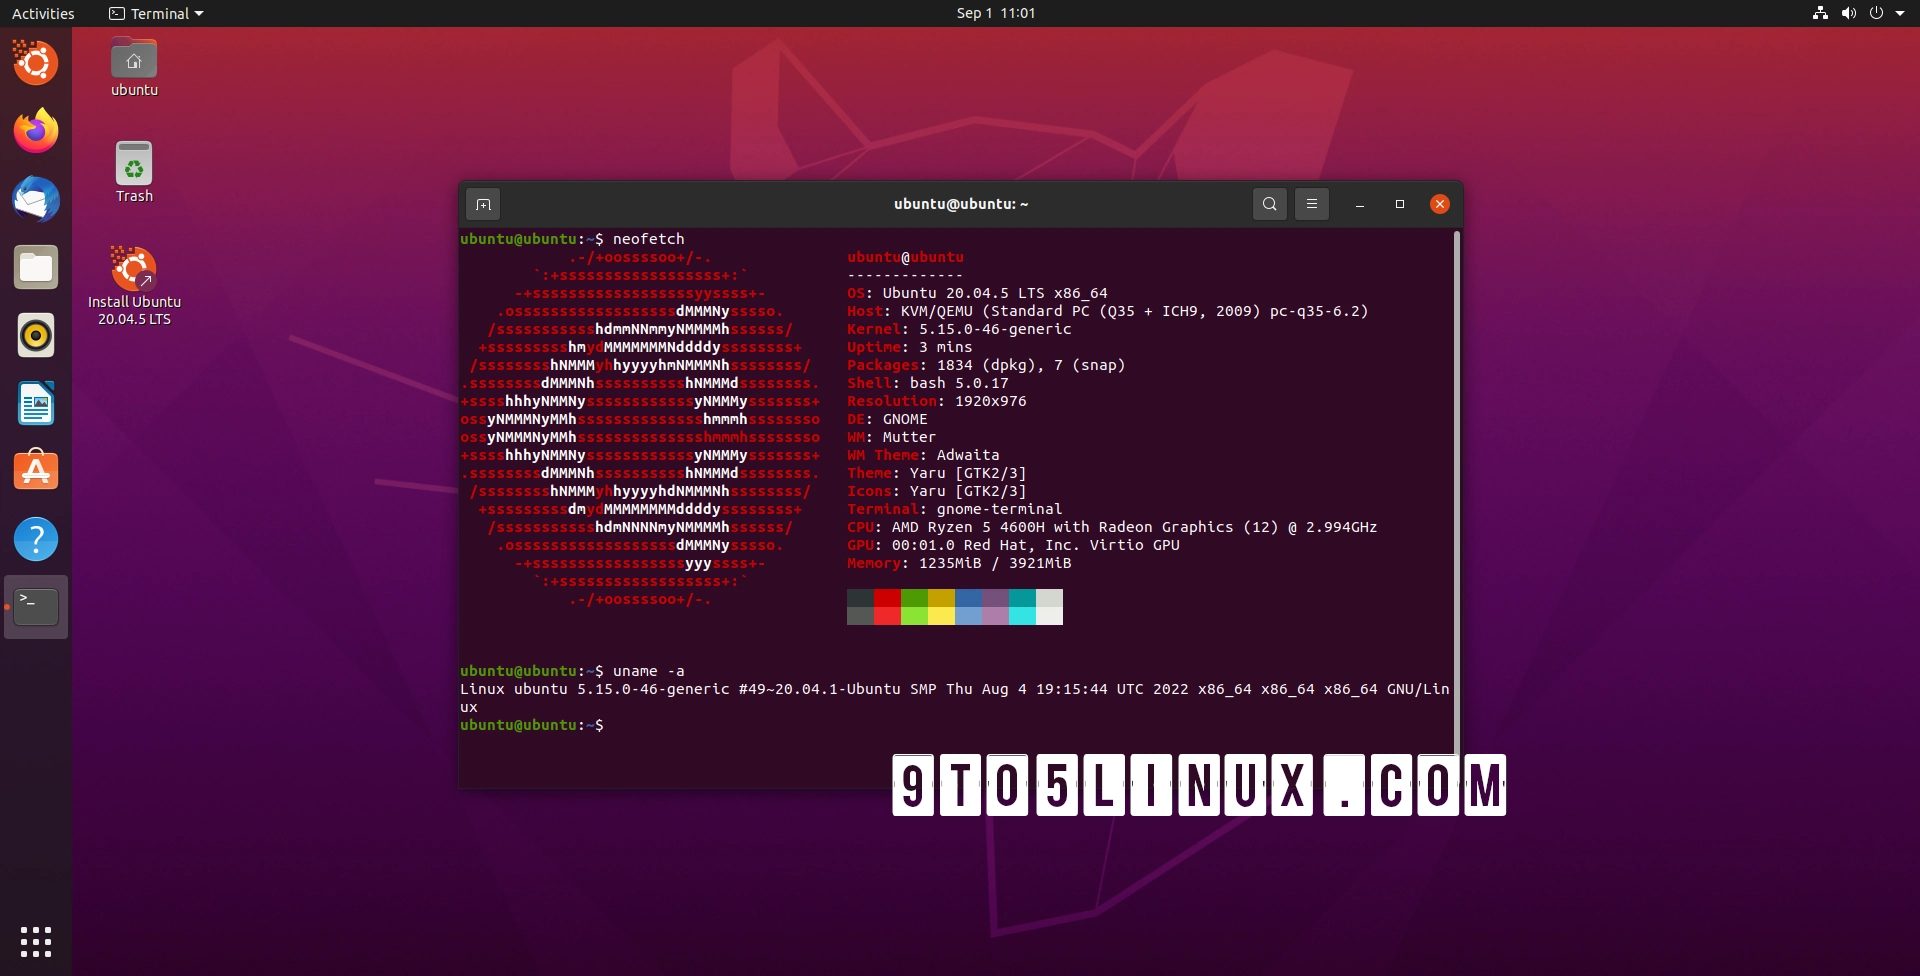 Ubuntu 20.04.5 LTS Released with Linux Kernel 5.15 LTS from Ubuntu 22.04 LTS